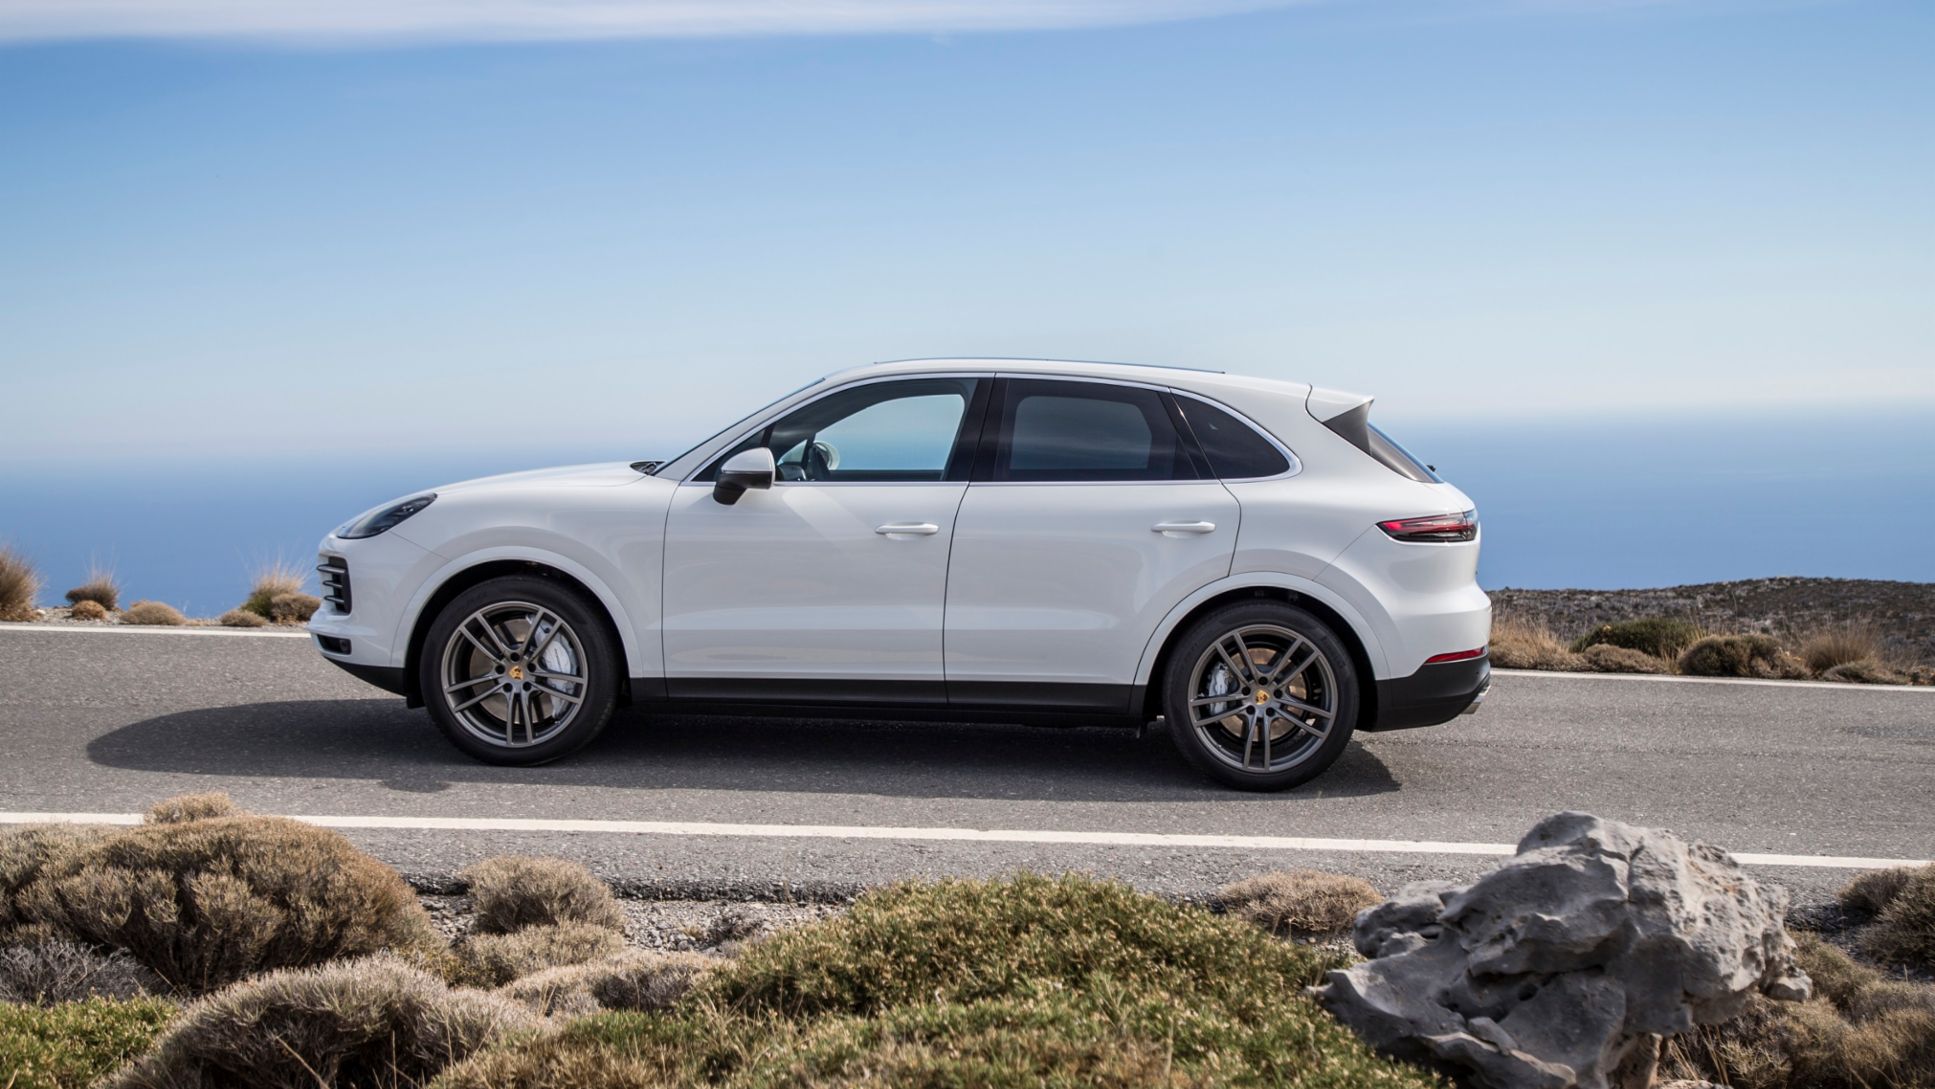 Porsche Reports Record U.S. Retail Sales in July. August 1, 2019, PCNA 